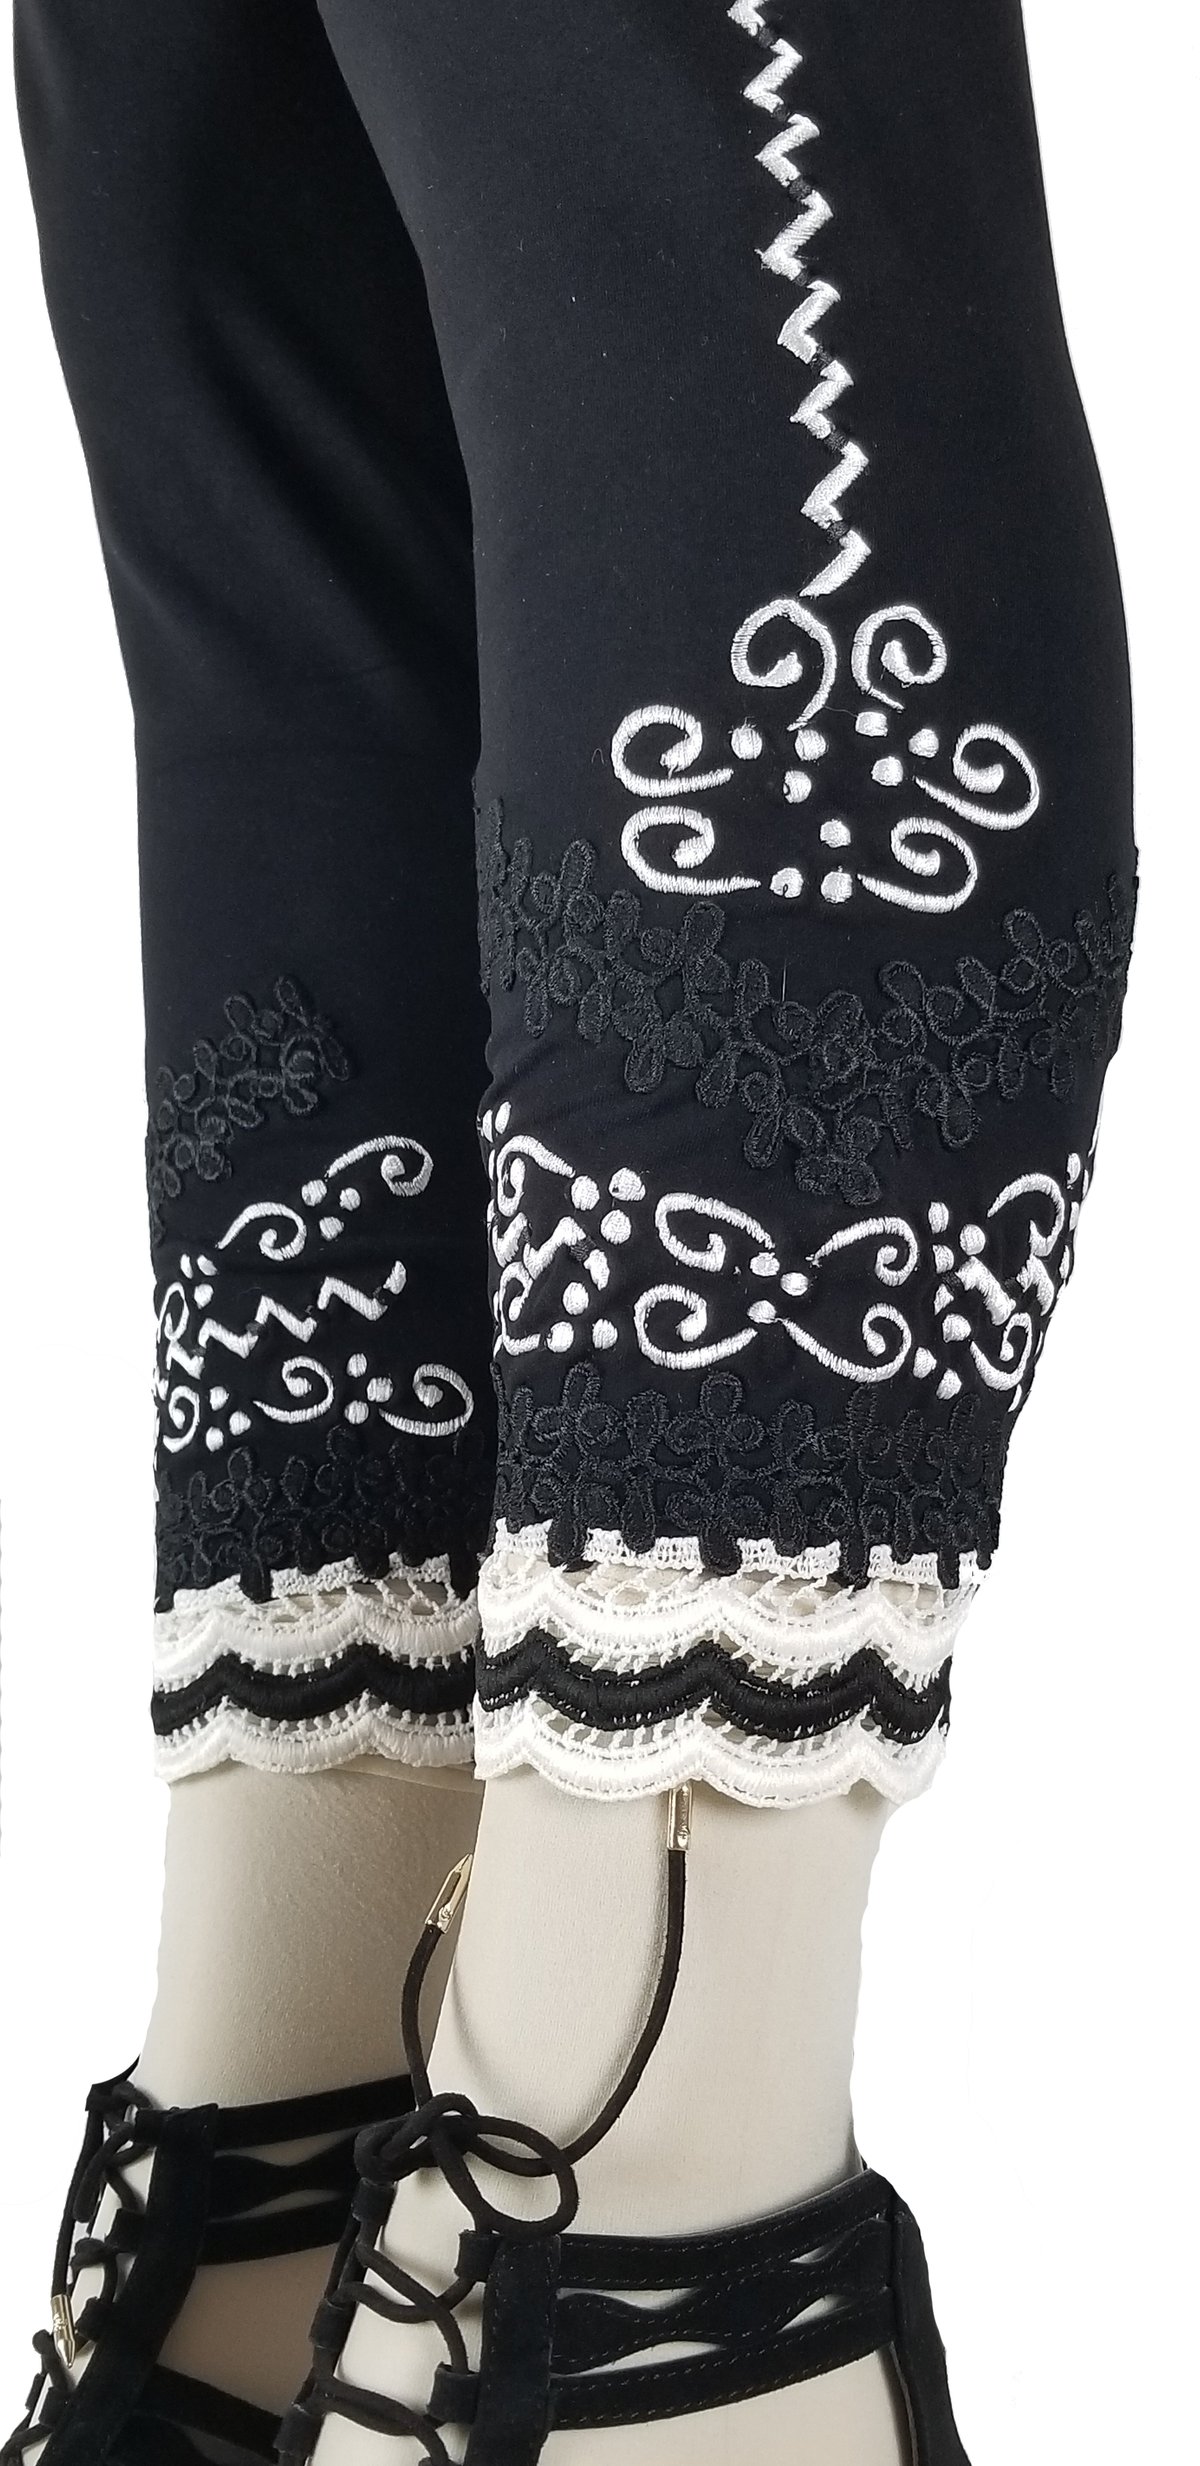 Black and White lace ankle FW6113